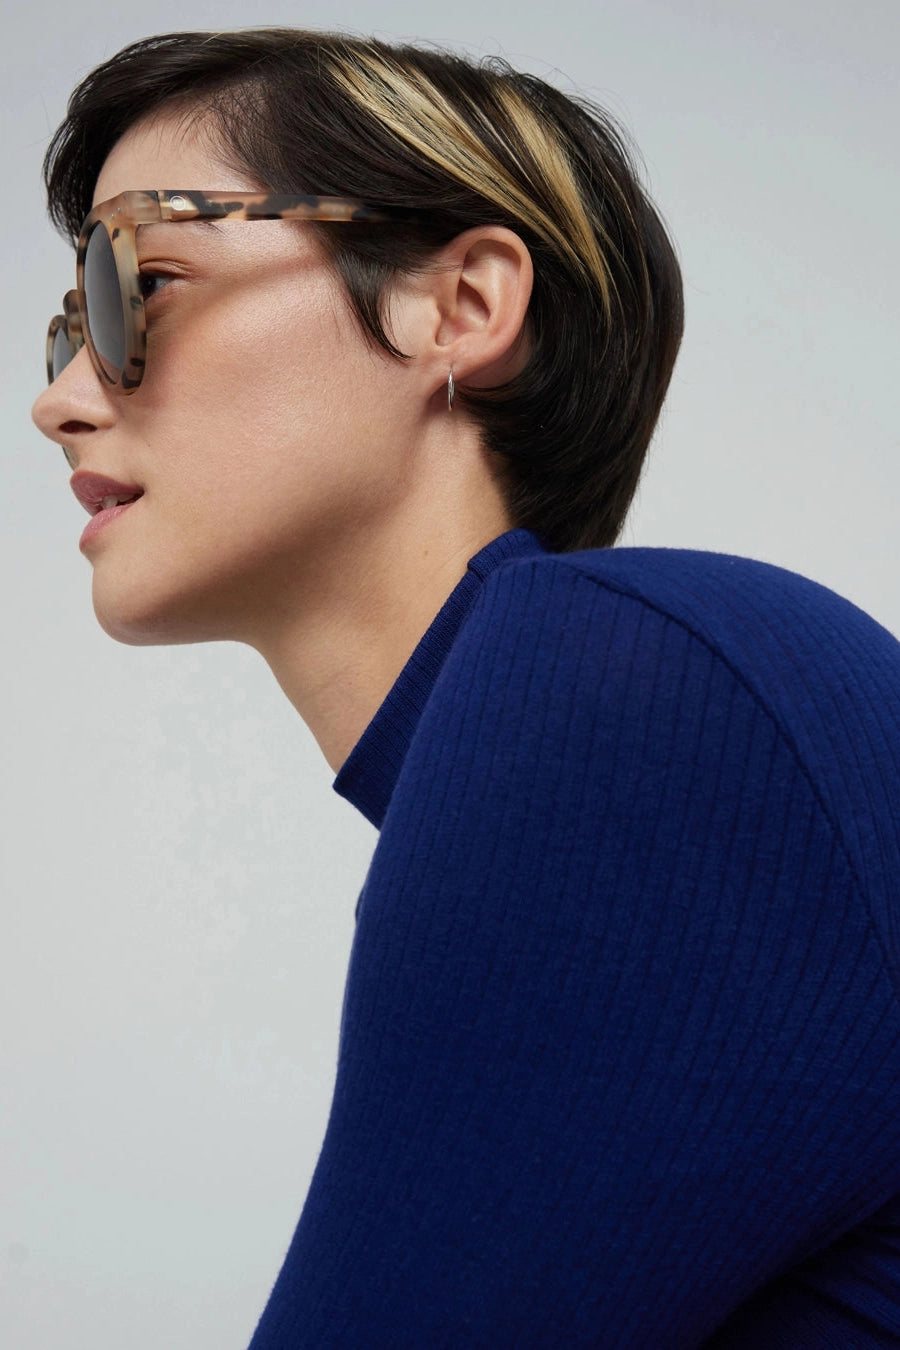 Izipizi #M Sunglasses in Light Tortoise-Accessories-Ohh! By Gum - Shop Sustainable